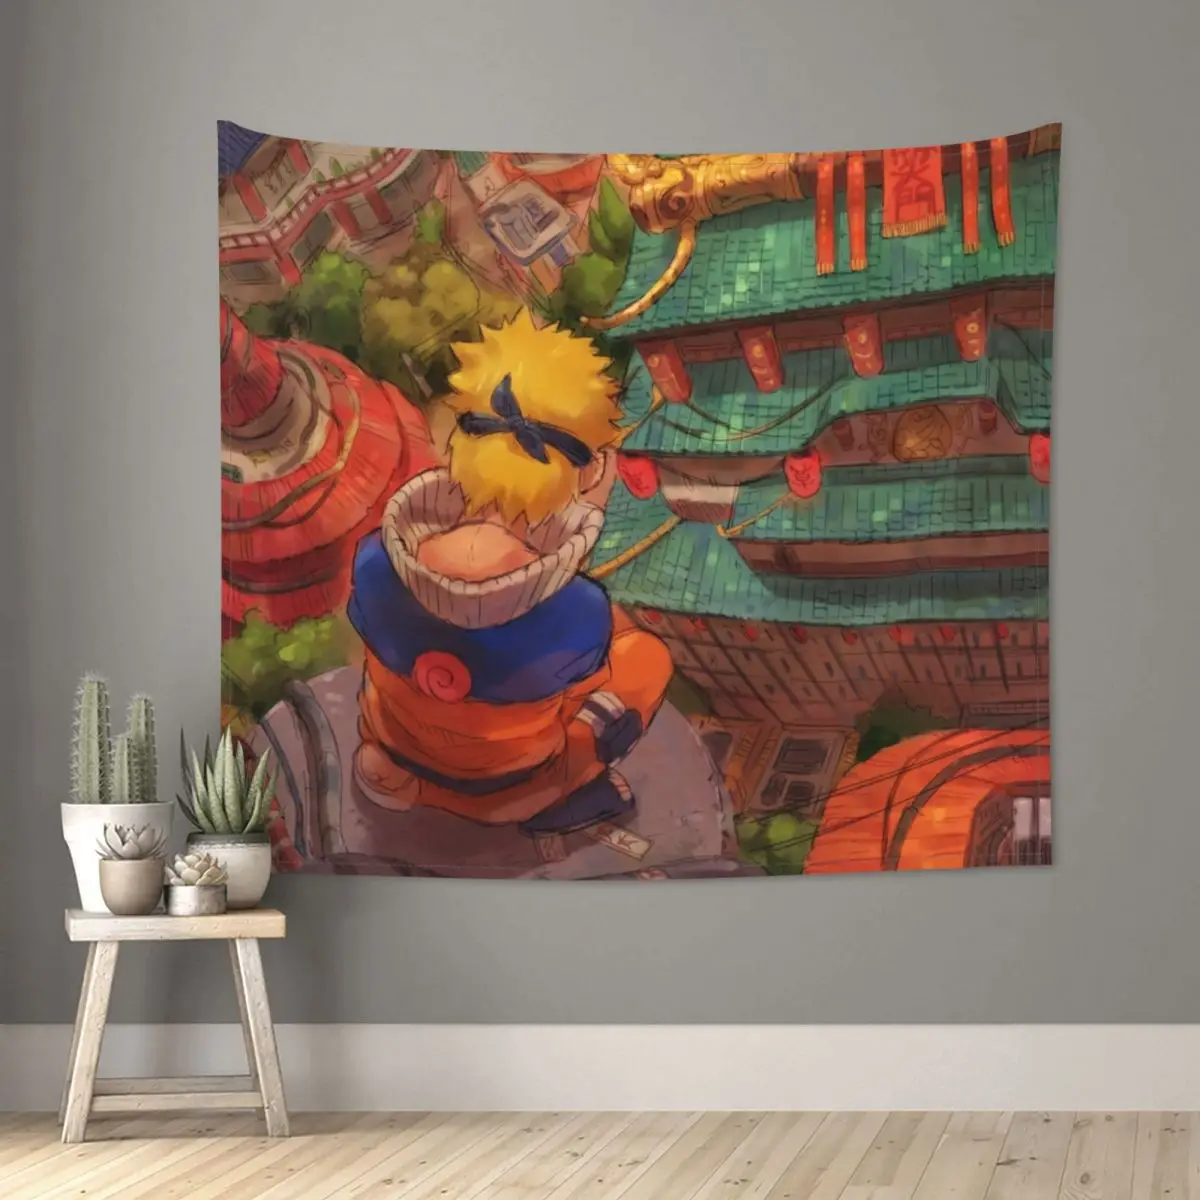 

Lonely Villages Away Tapestry Wall Hanging Hippie Polyester Tapestries Anime Manga Bohemian Throw Rug Blanket Dorm Decor 95x73cm